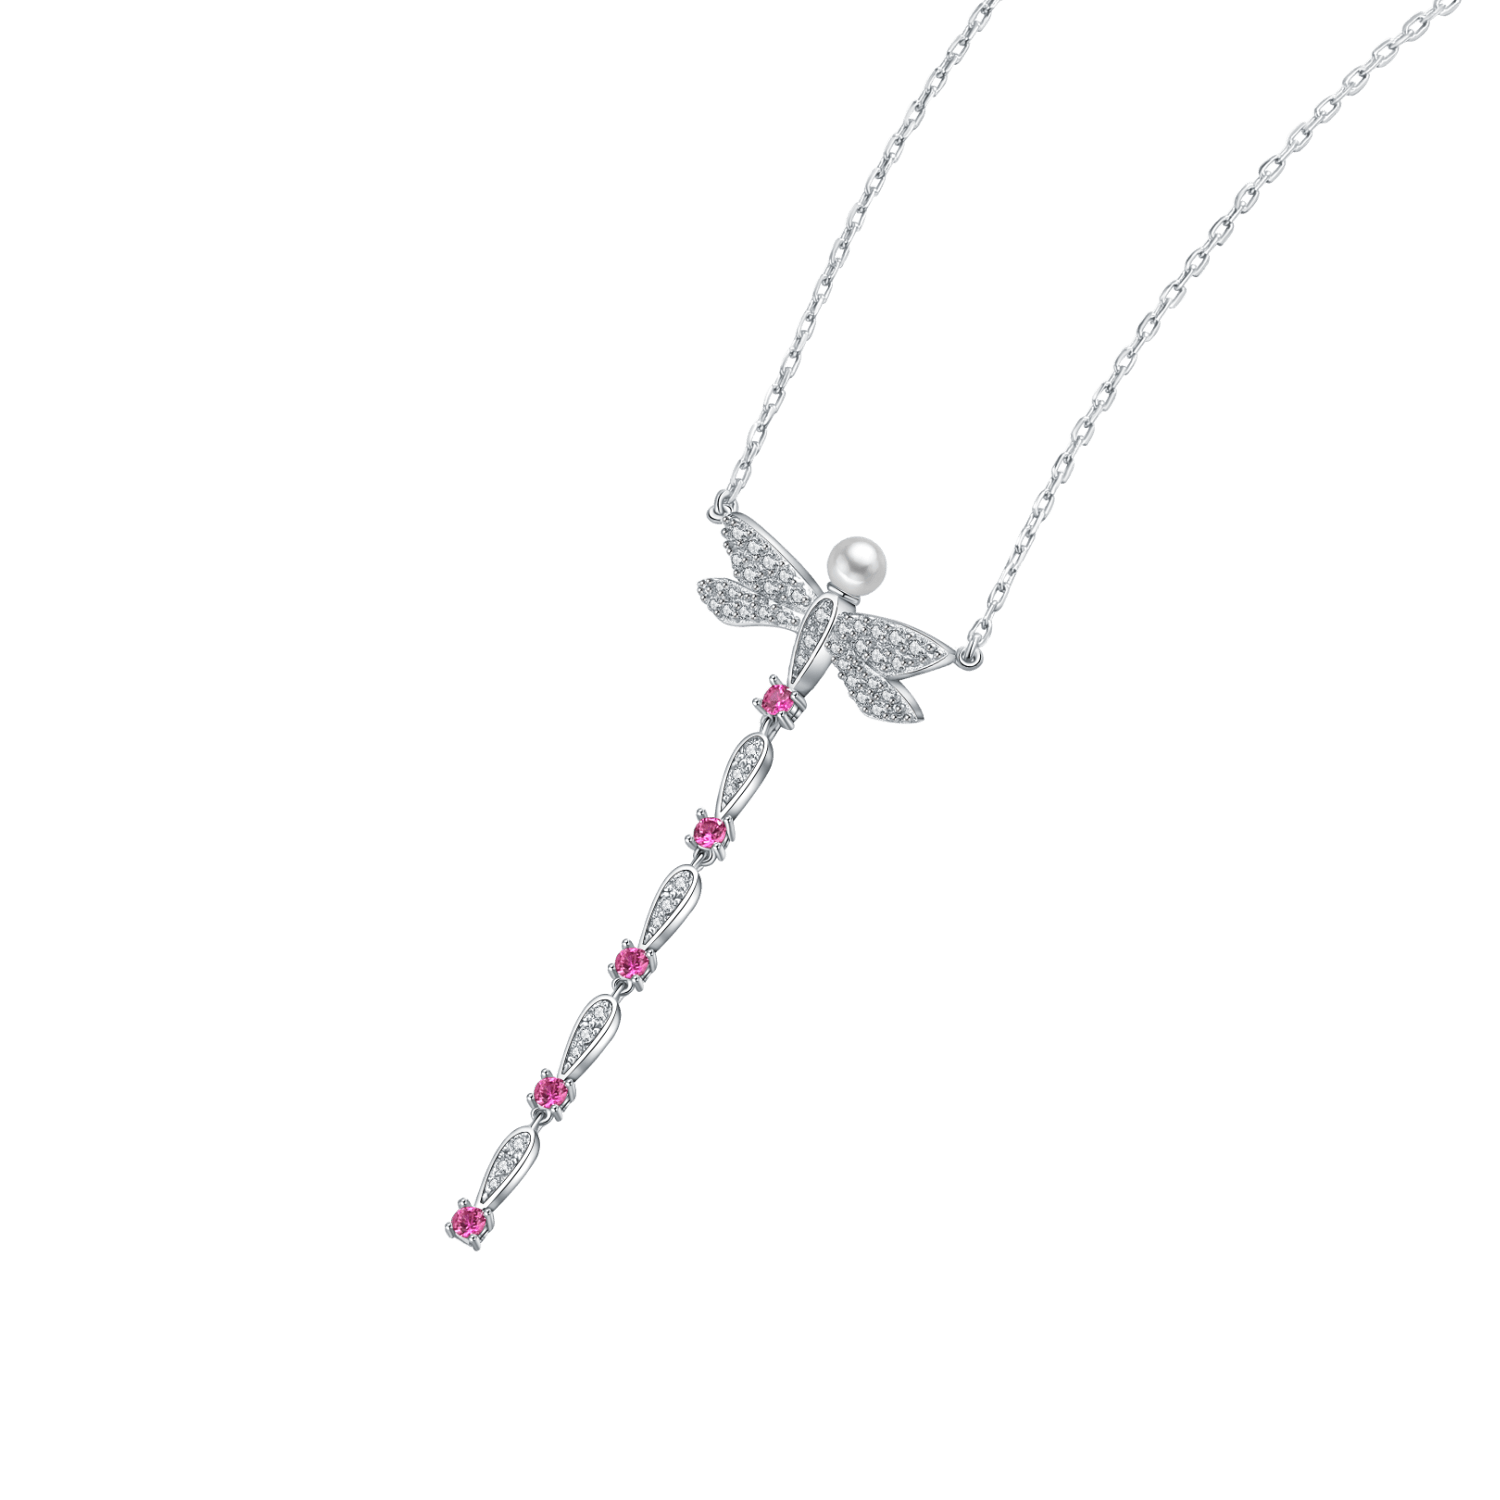 Dragonfly Lariat Necklace